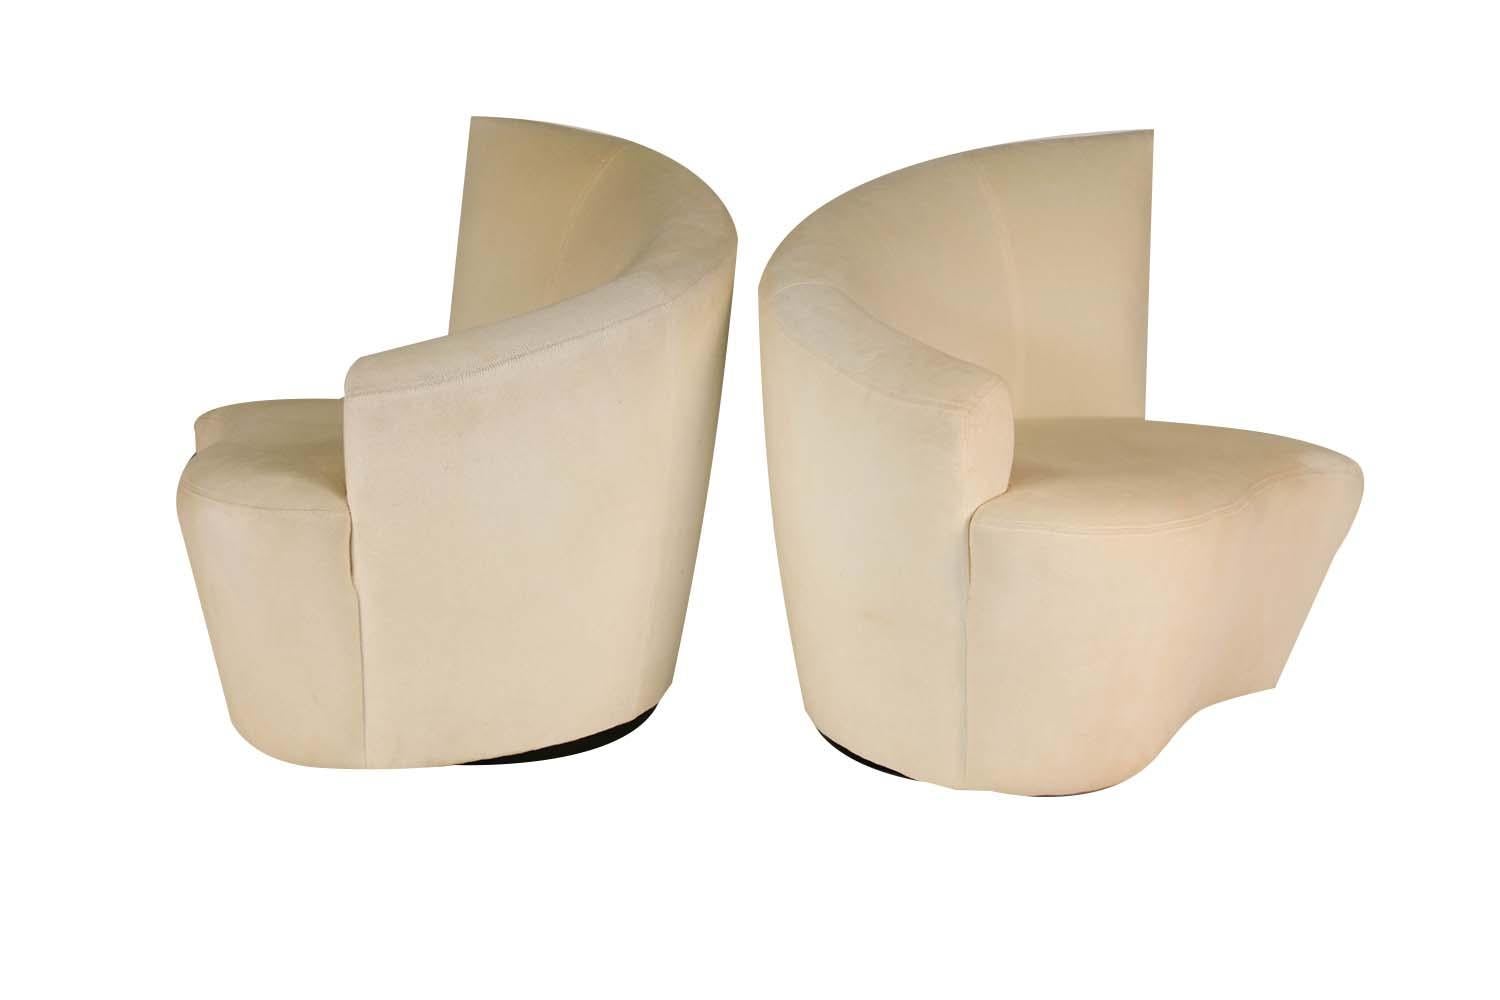 Superb pair of sculptural Bilbao swivel lounge chairs designed by Vladimir Kagan for Weiman Preview. Features beautiful and uniquely stylish shaped, curved angular backrests/armrests, with comfortable plush seats. Chairs rest on circular swivel